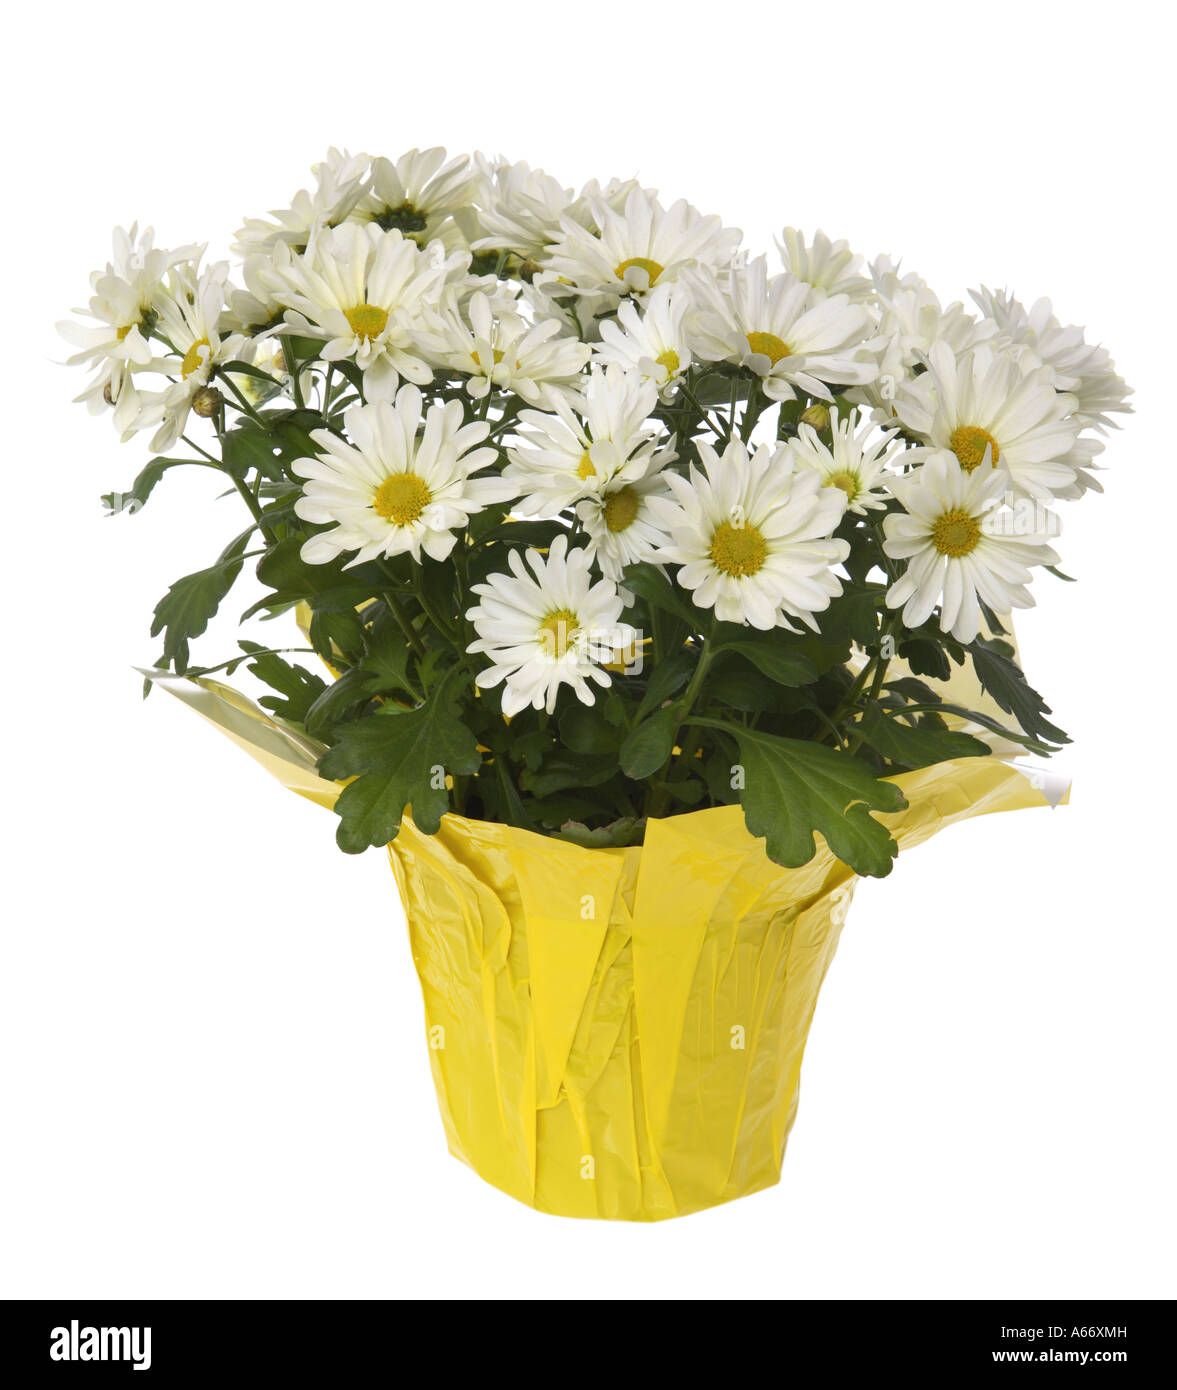 daisies cut out on white background Stock Photo